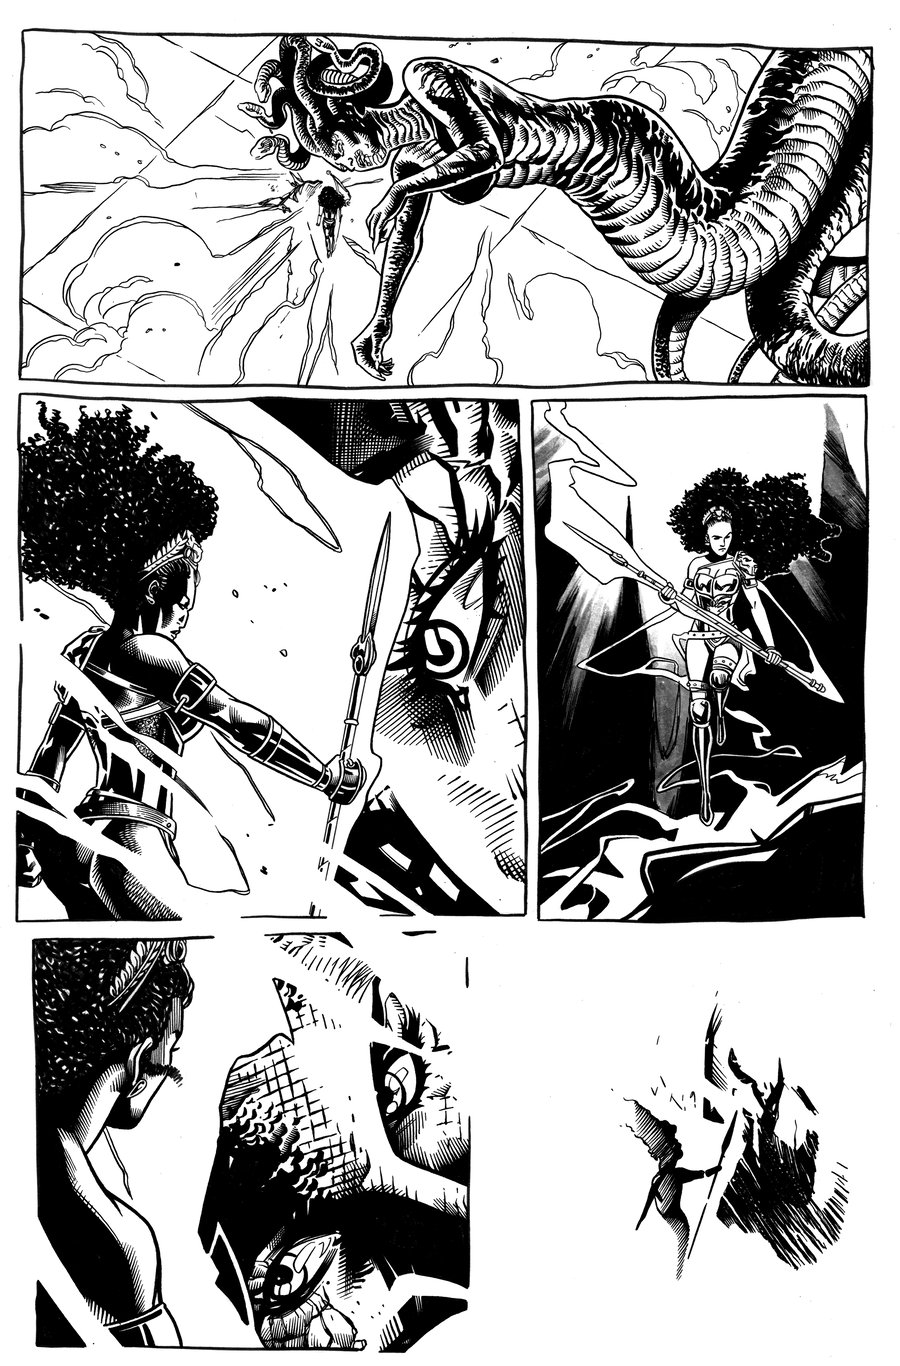 Image of Nubia and the Amazons #5 PG 9